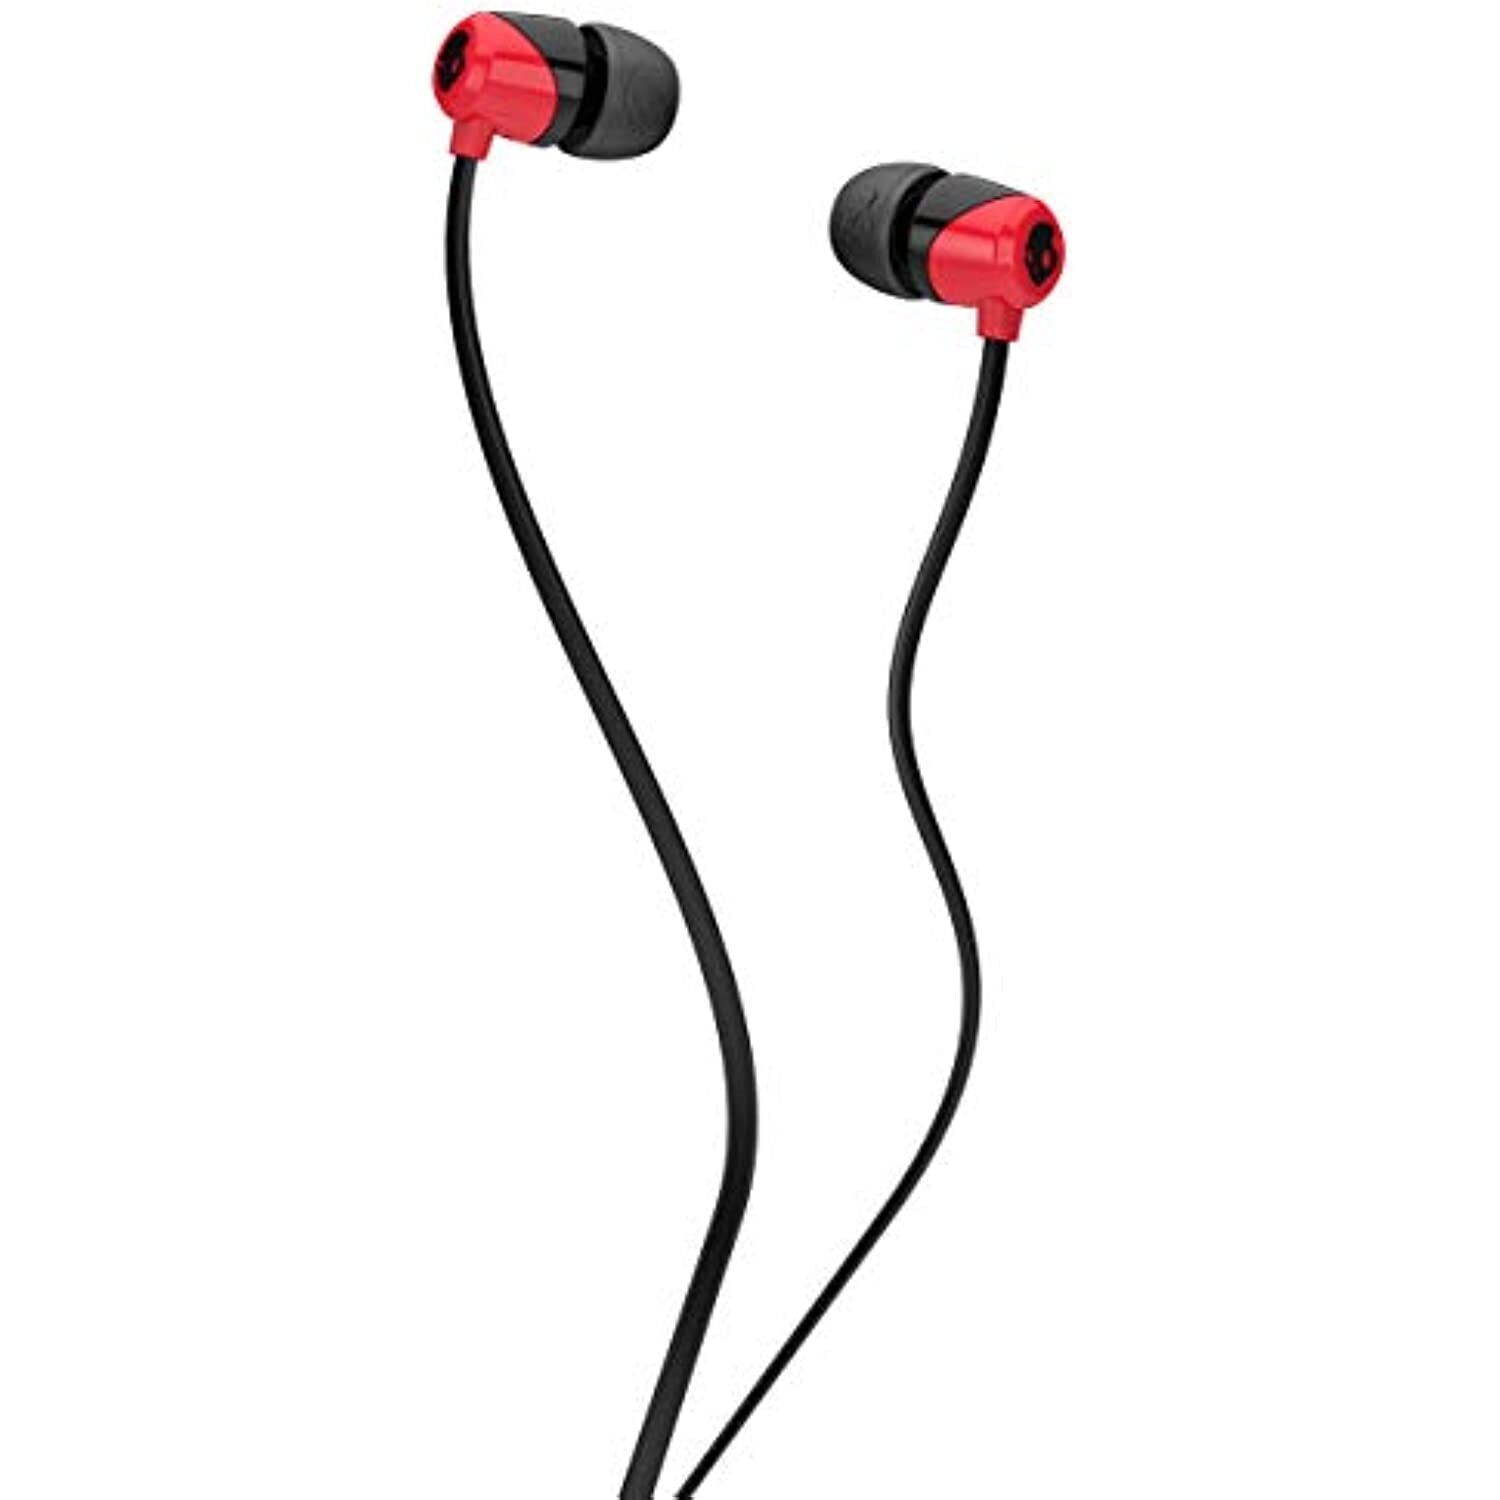 Skullcandy Jib In-Ear Noise-Isolating Earbuds, Lightweight, Stereo Sound and - $20.99